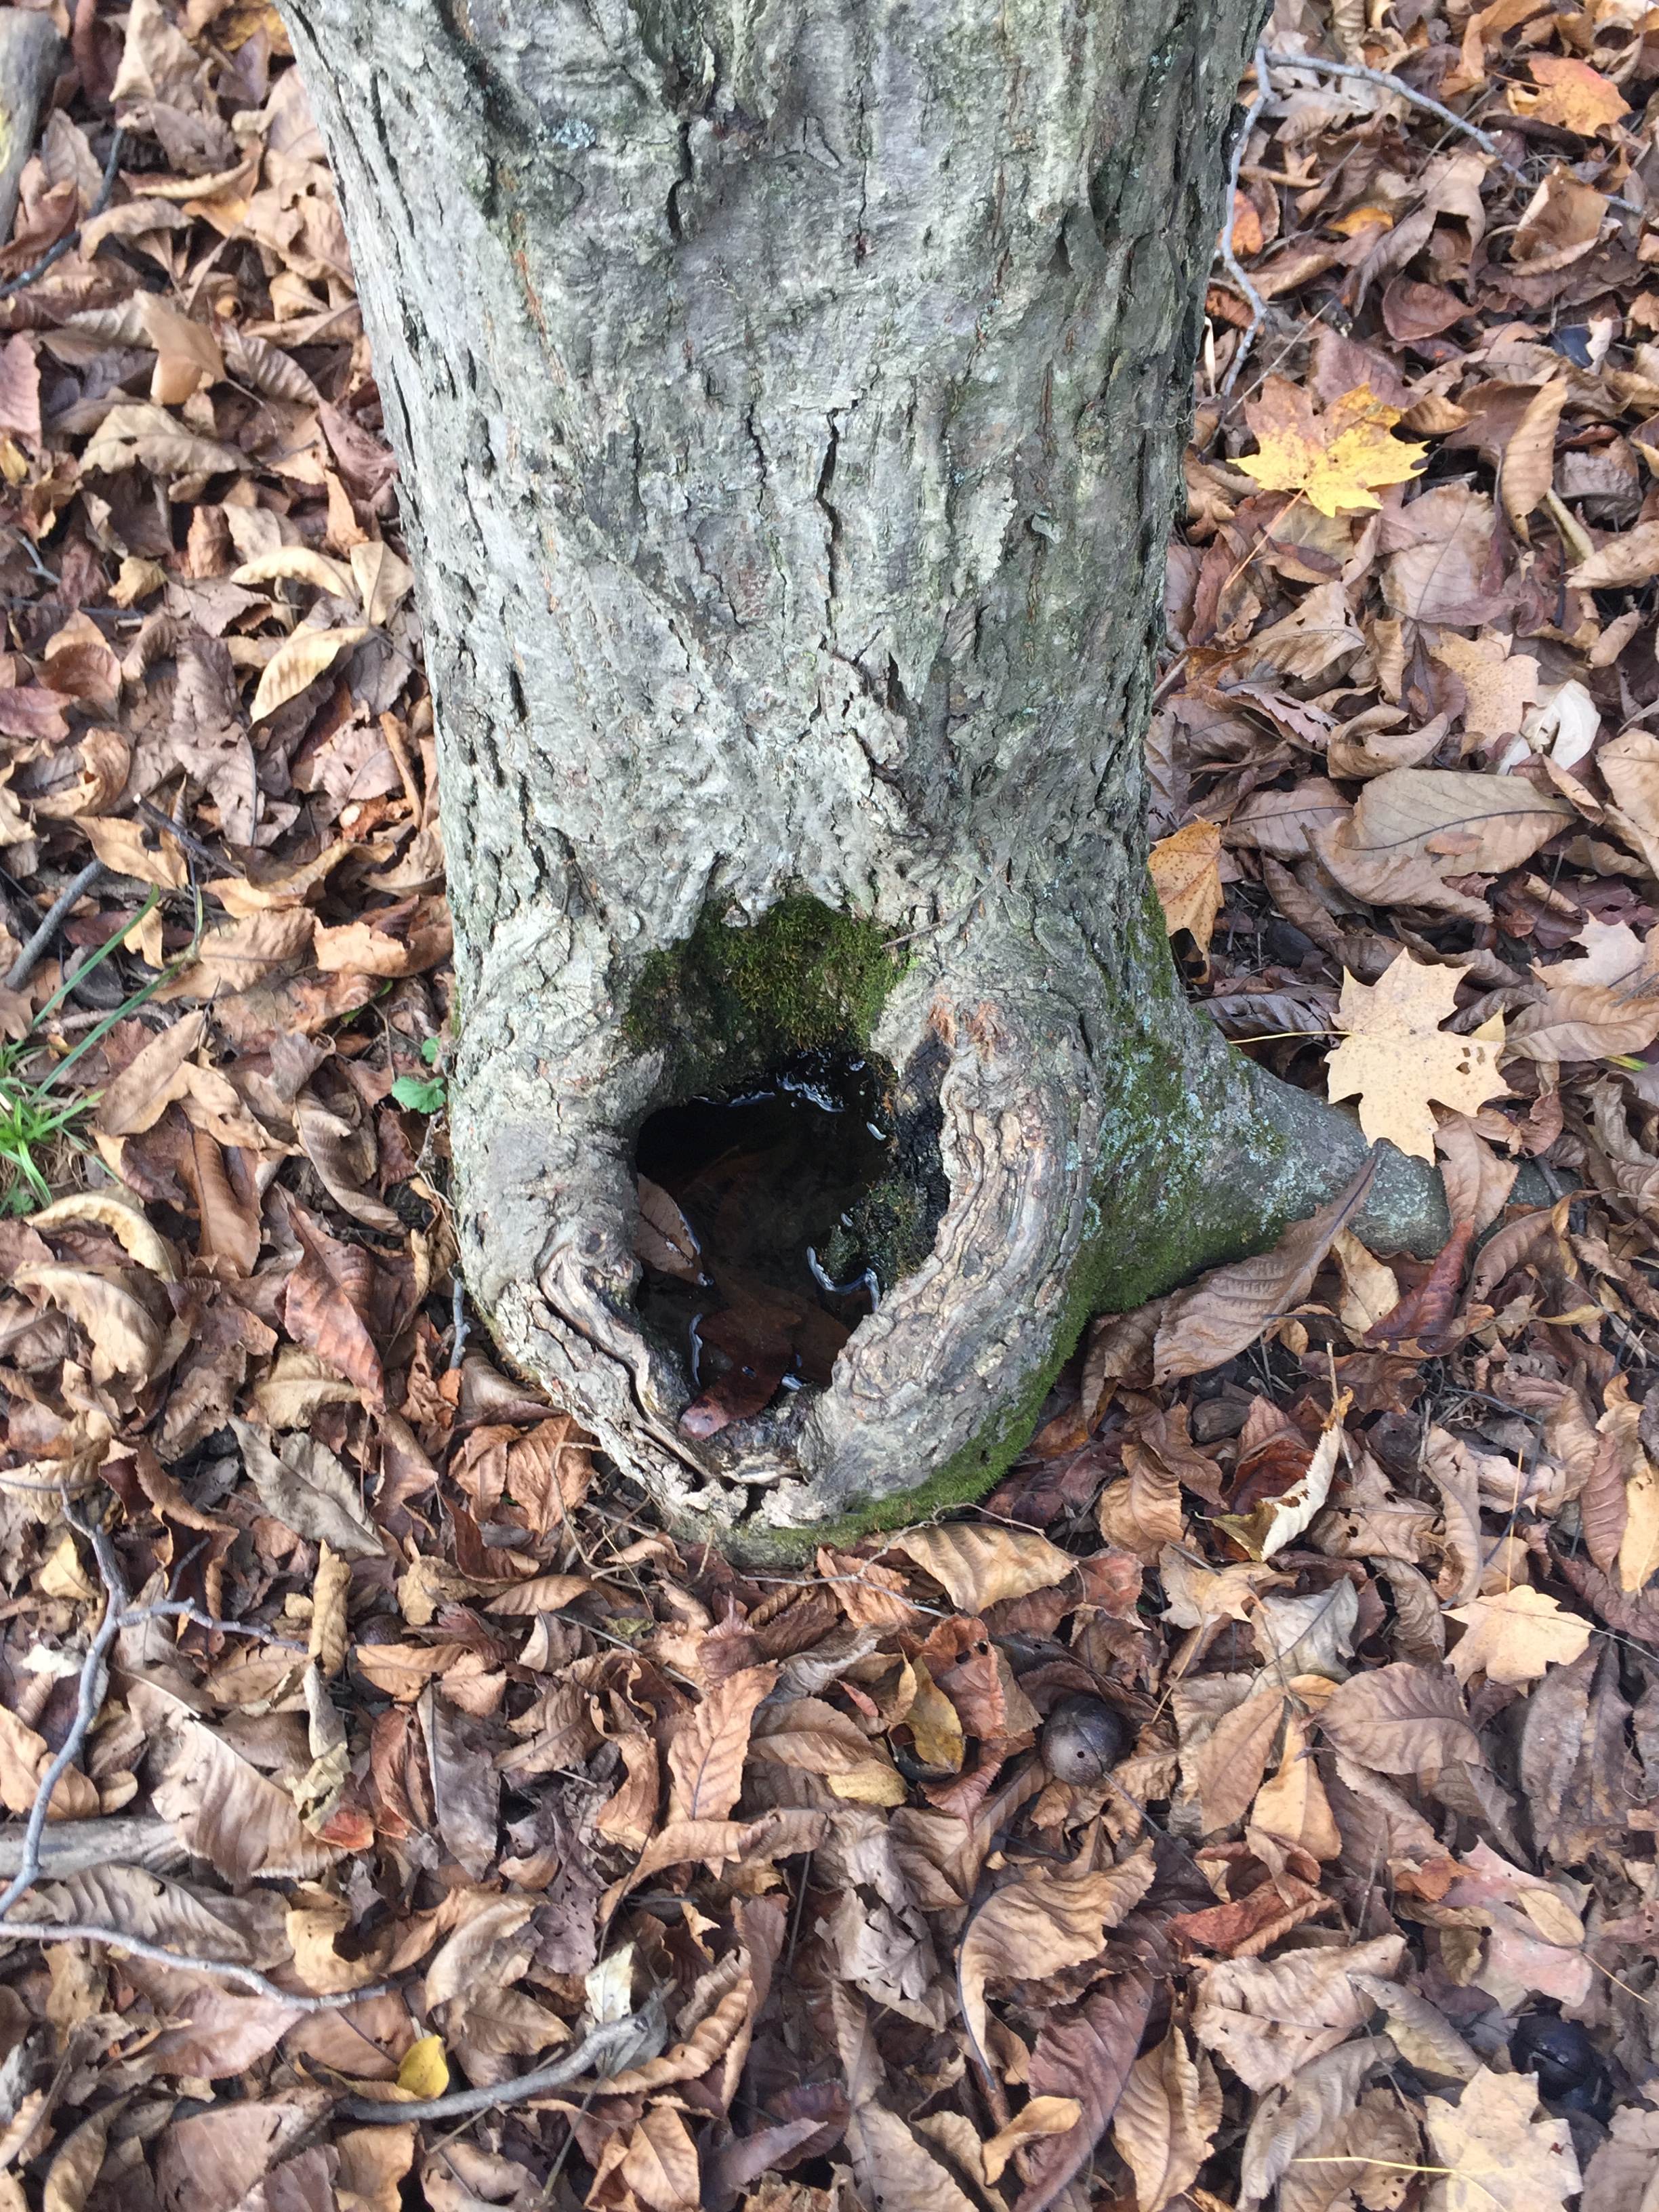 Tree hole containing water; preferred breeding site for Aedes triseriatus mosquitoes. Indiana State Department of Health.